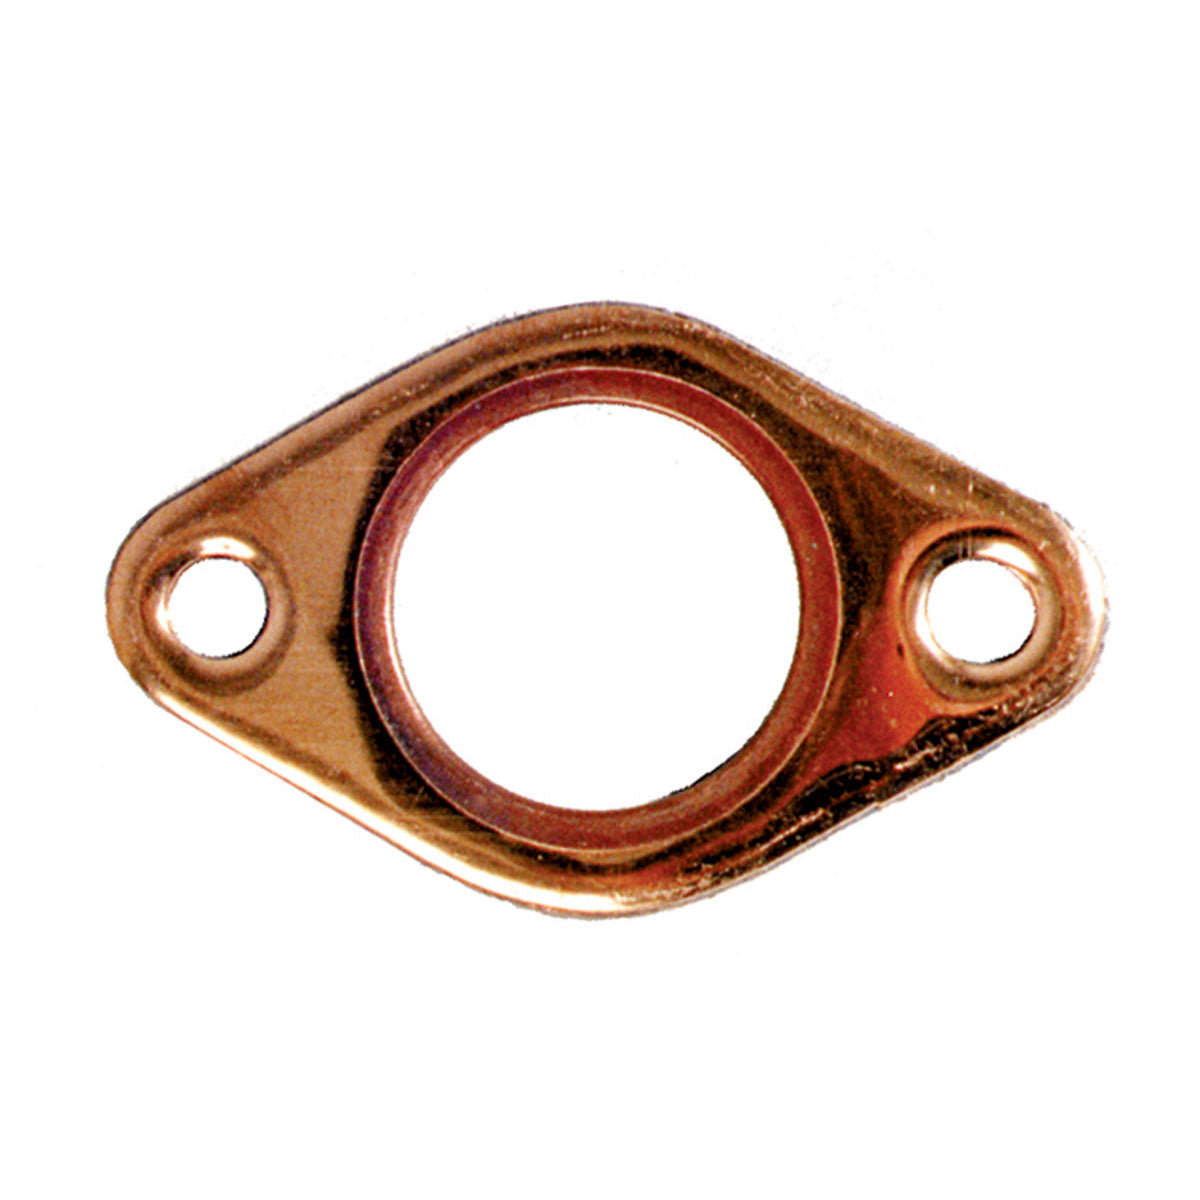 Yamaha KTJ Exhaust Gasket Copper Re-Usable Type